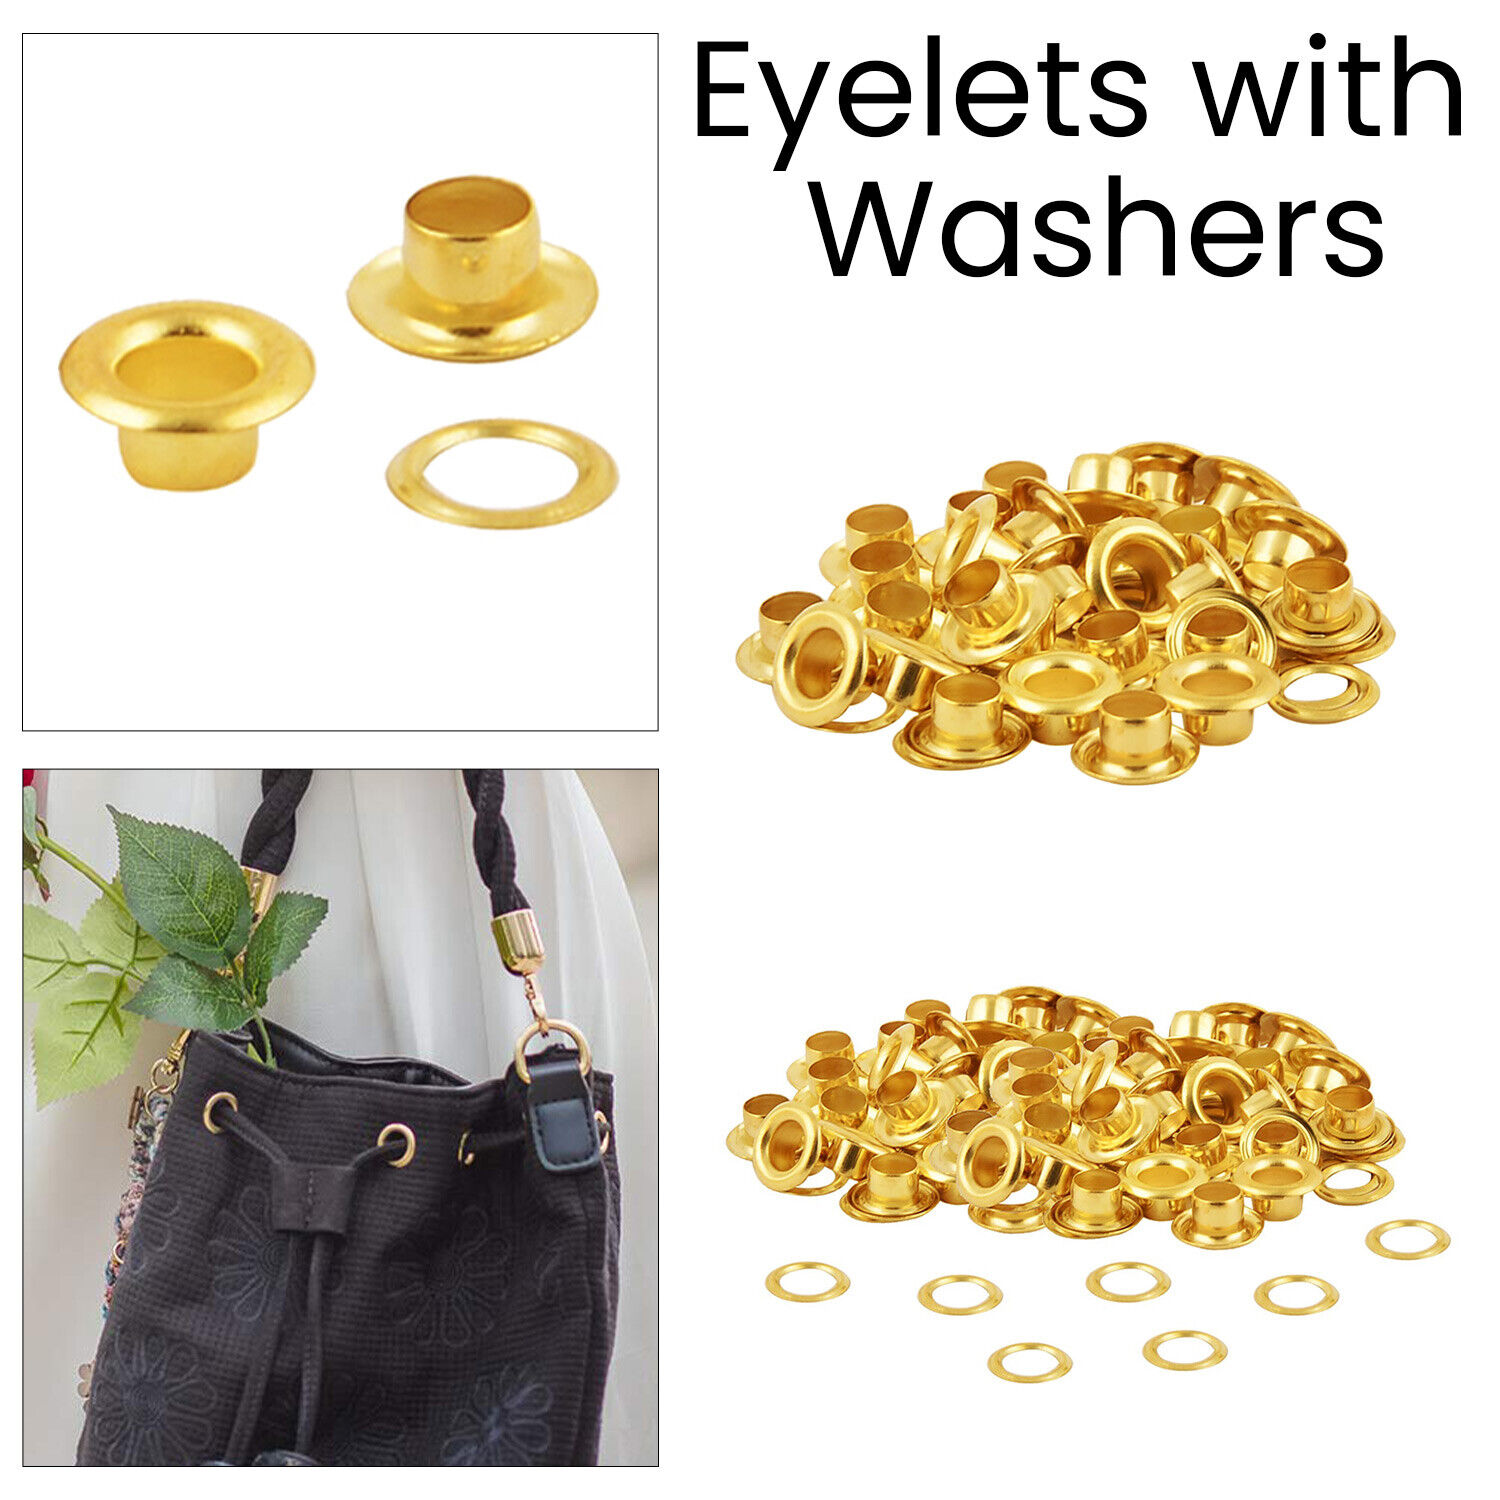 100pcs 8mm Iron Eyelets Grommets with Washers Repair DIY Leather Craft Bags Gold